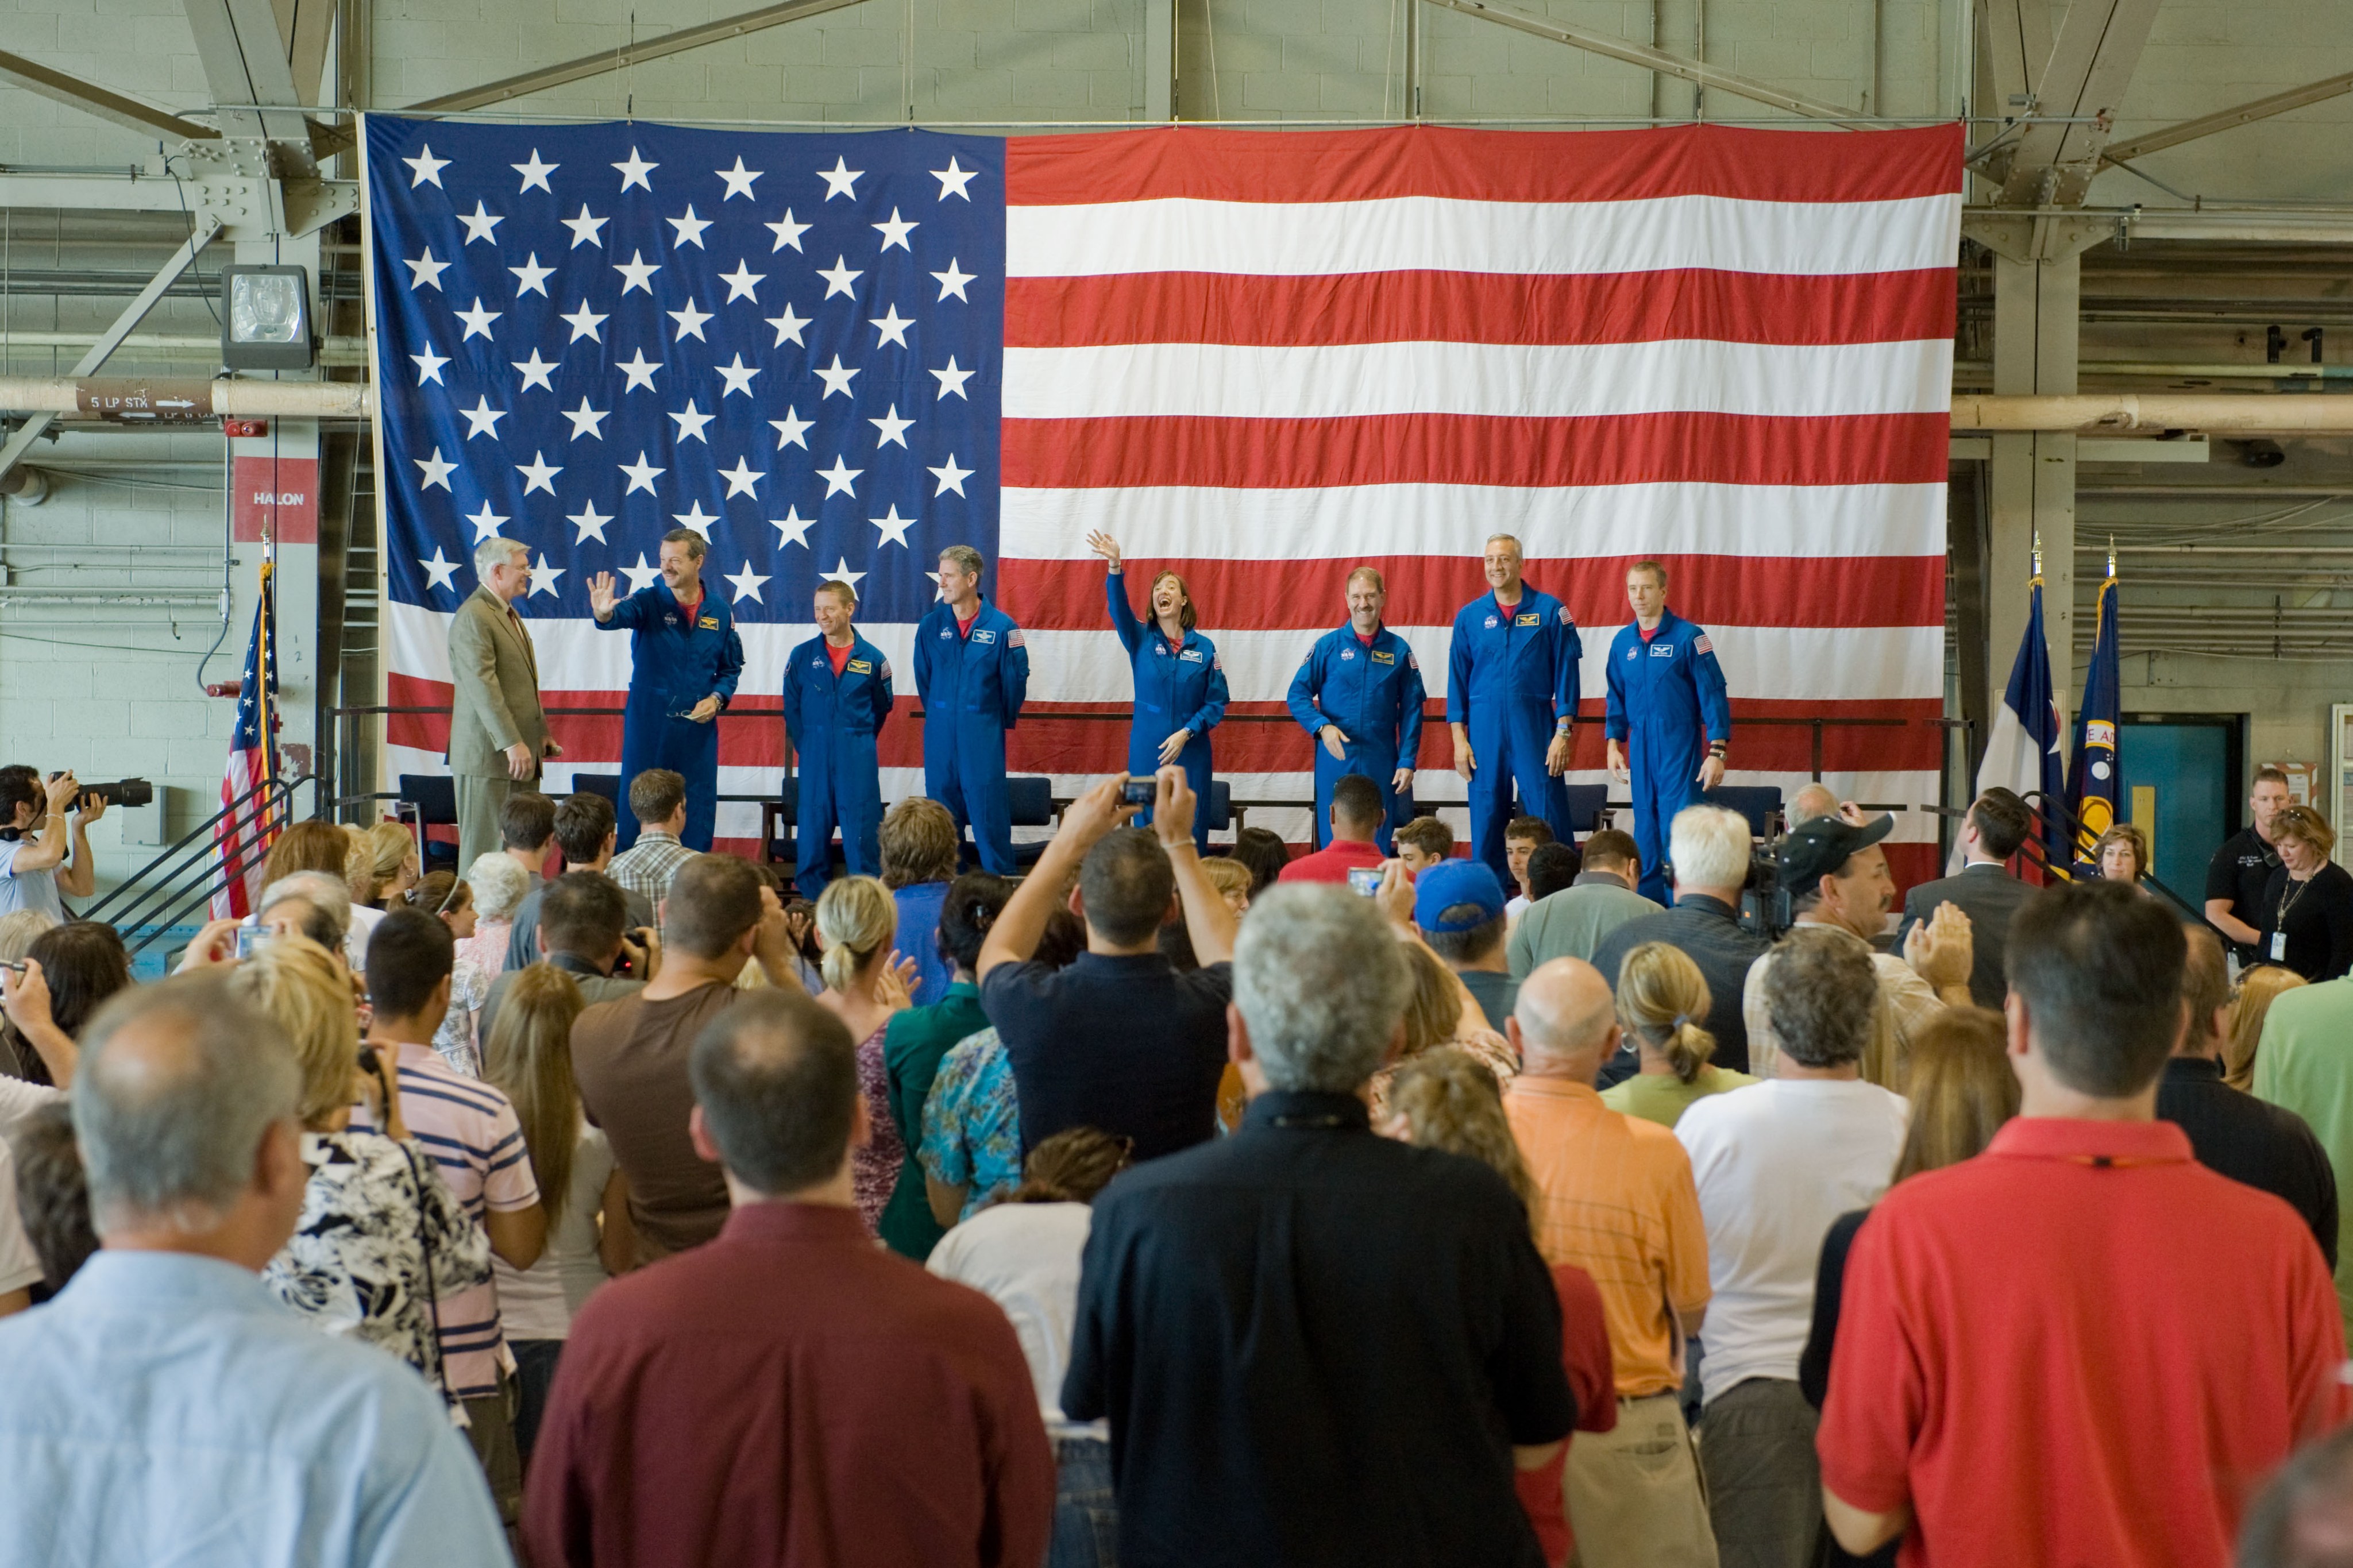 The astronauts of Servicing Mission 4 are lined up on stage with the background of an American flag, which hangs on the wall behind them. they are smiling and waving. A crowd of people are visible in front of them.